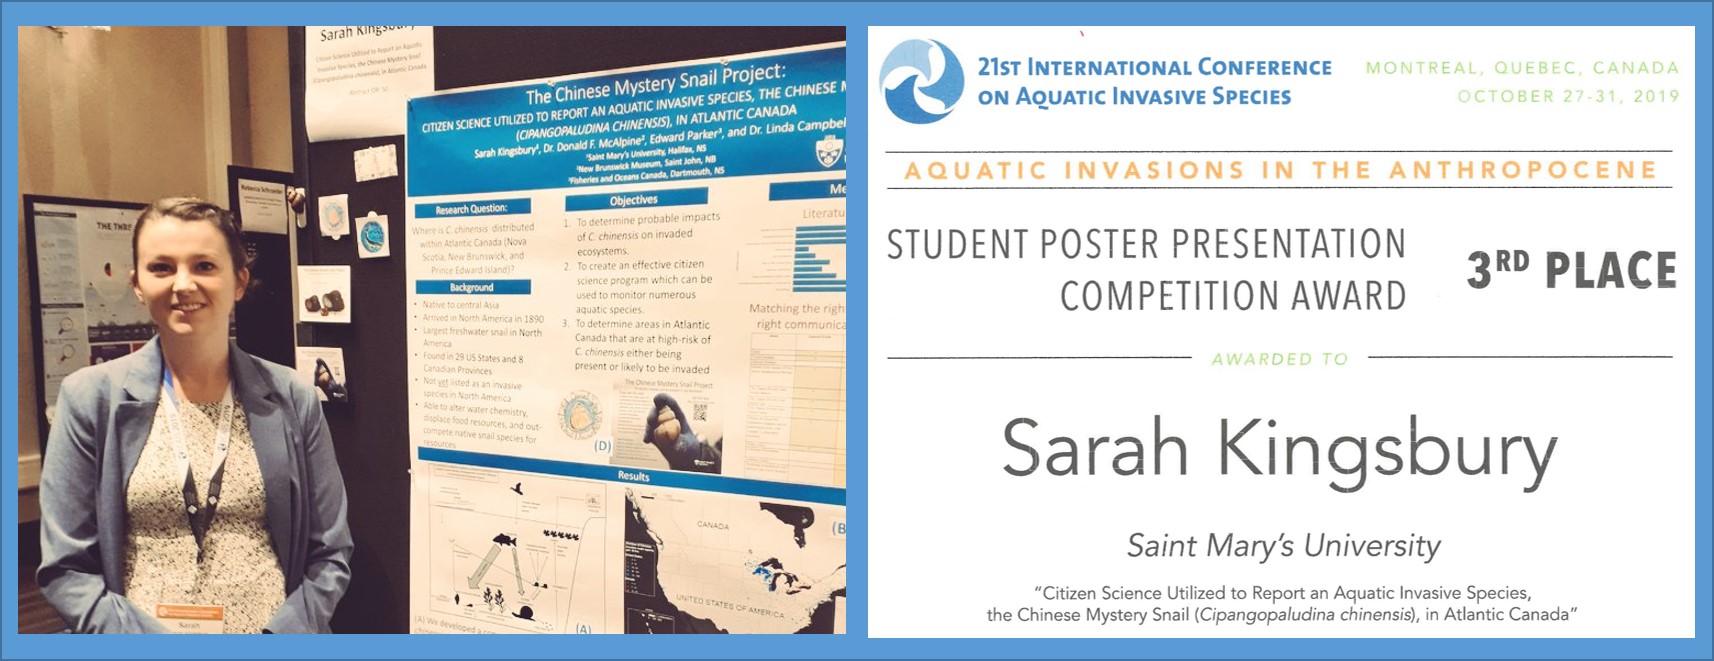 Sarah presenting  a scientific poster, award showing she was selected for 3rd place poster at the ICAIS conference in 2019